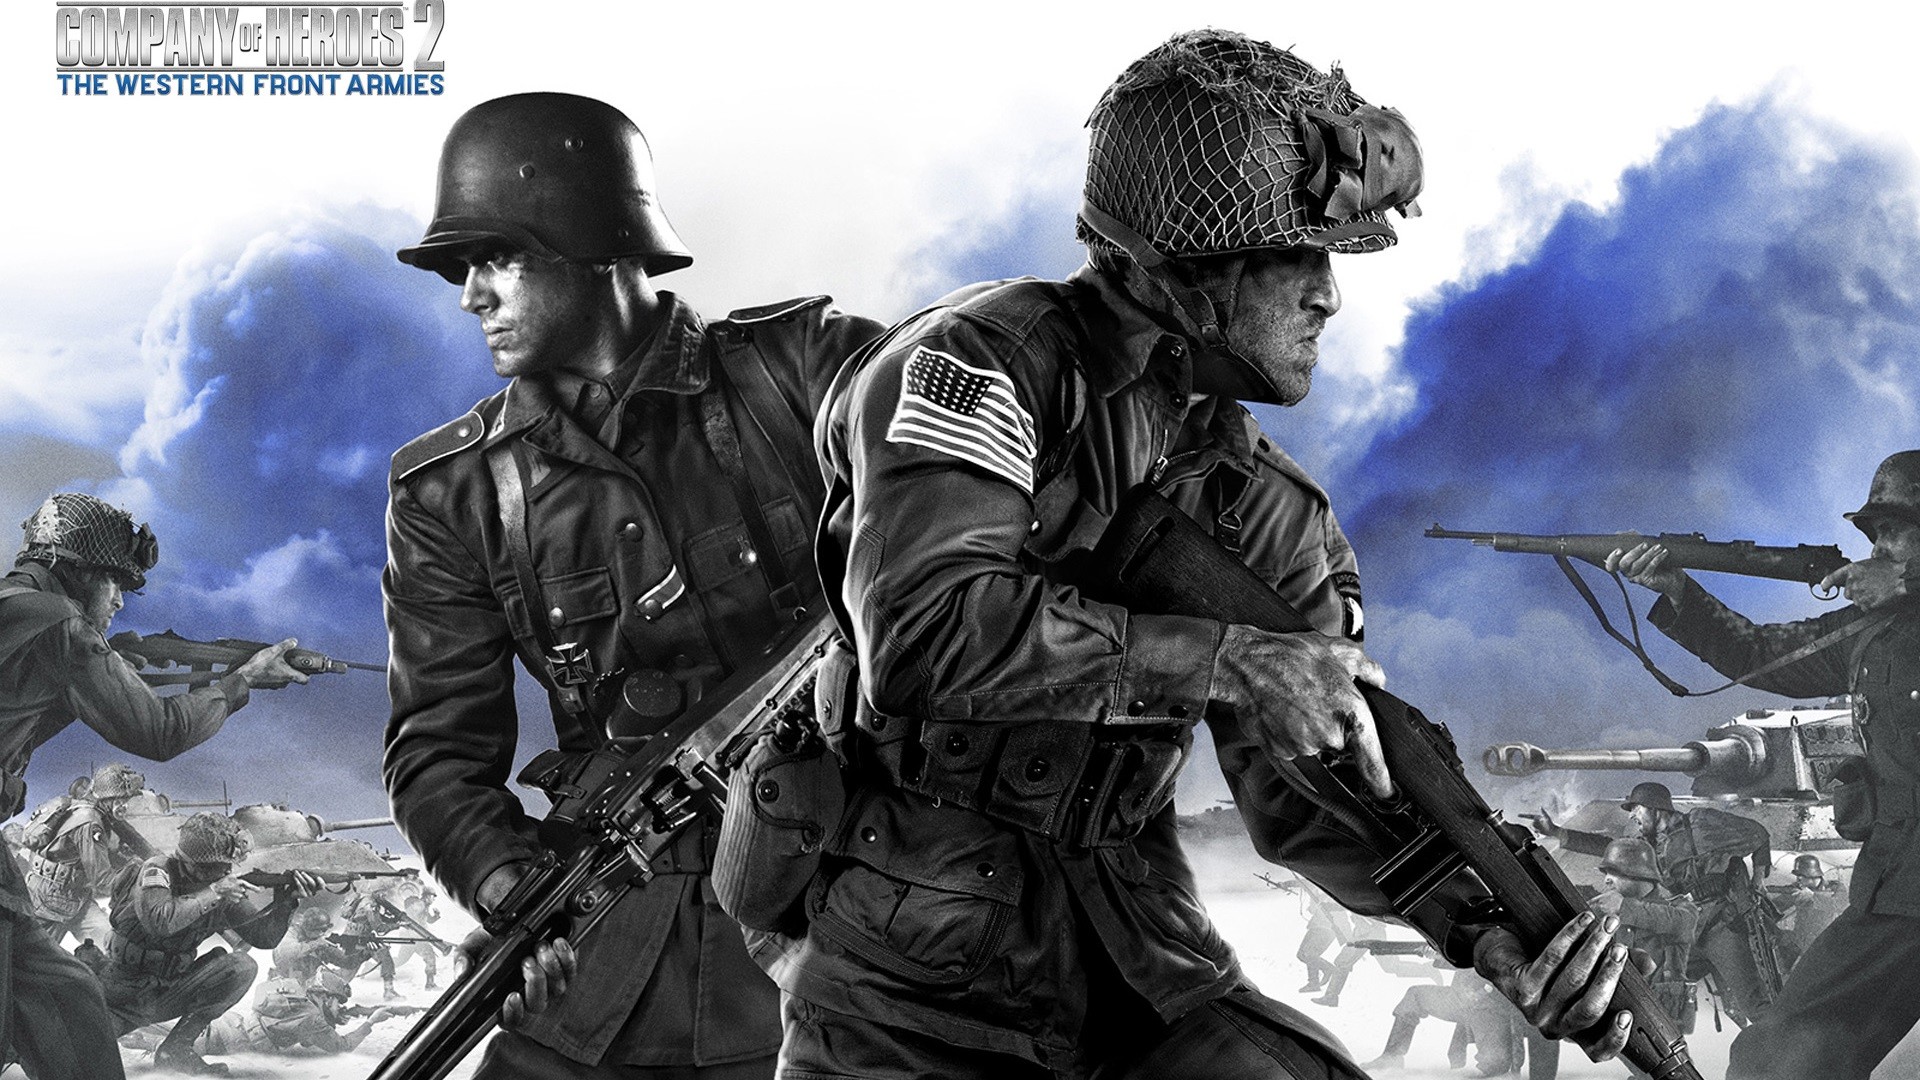 720p company of heroes 2 wallpaper